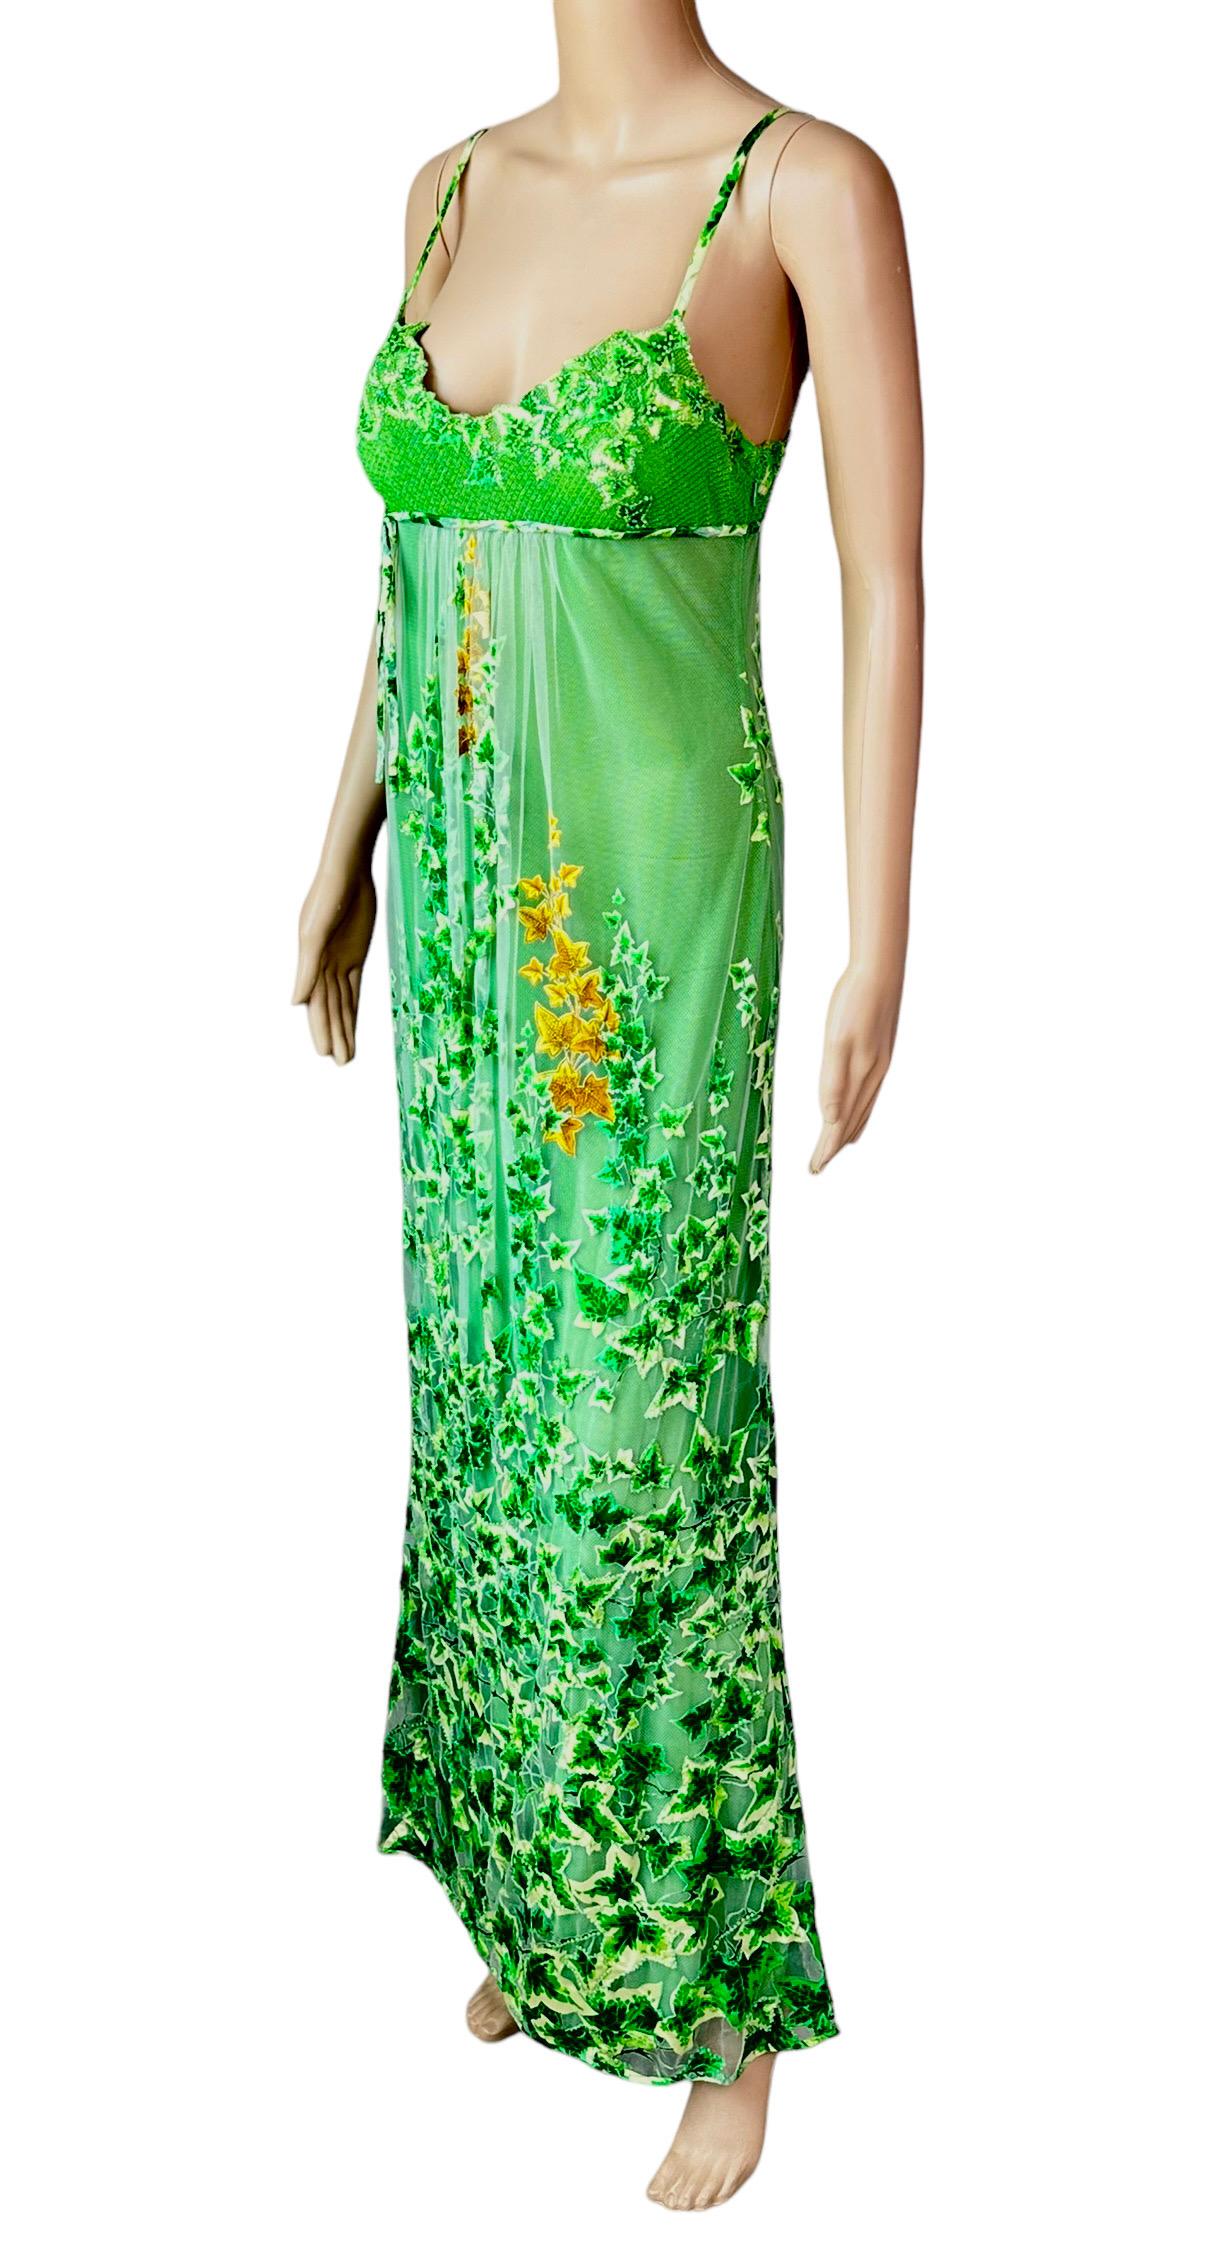 Gianni Versace S/S 1997 Runway Embellished Sheer Lace Shawl Evening Dress Gown  For Sale 1